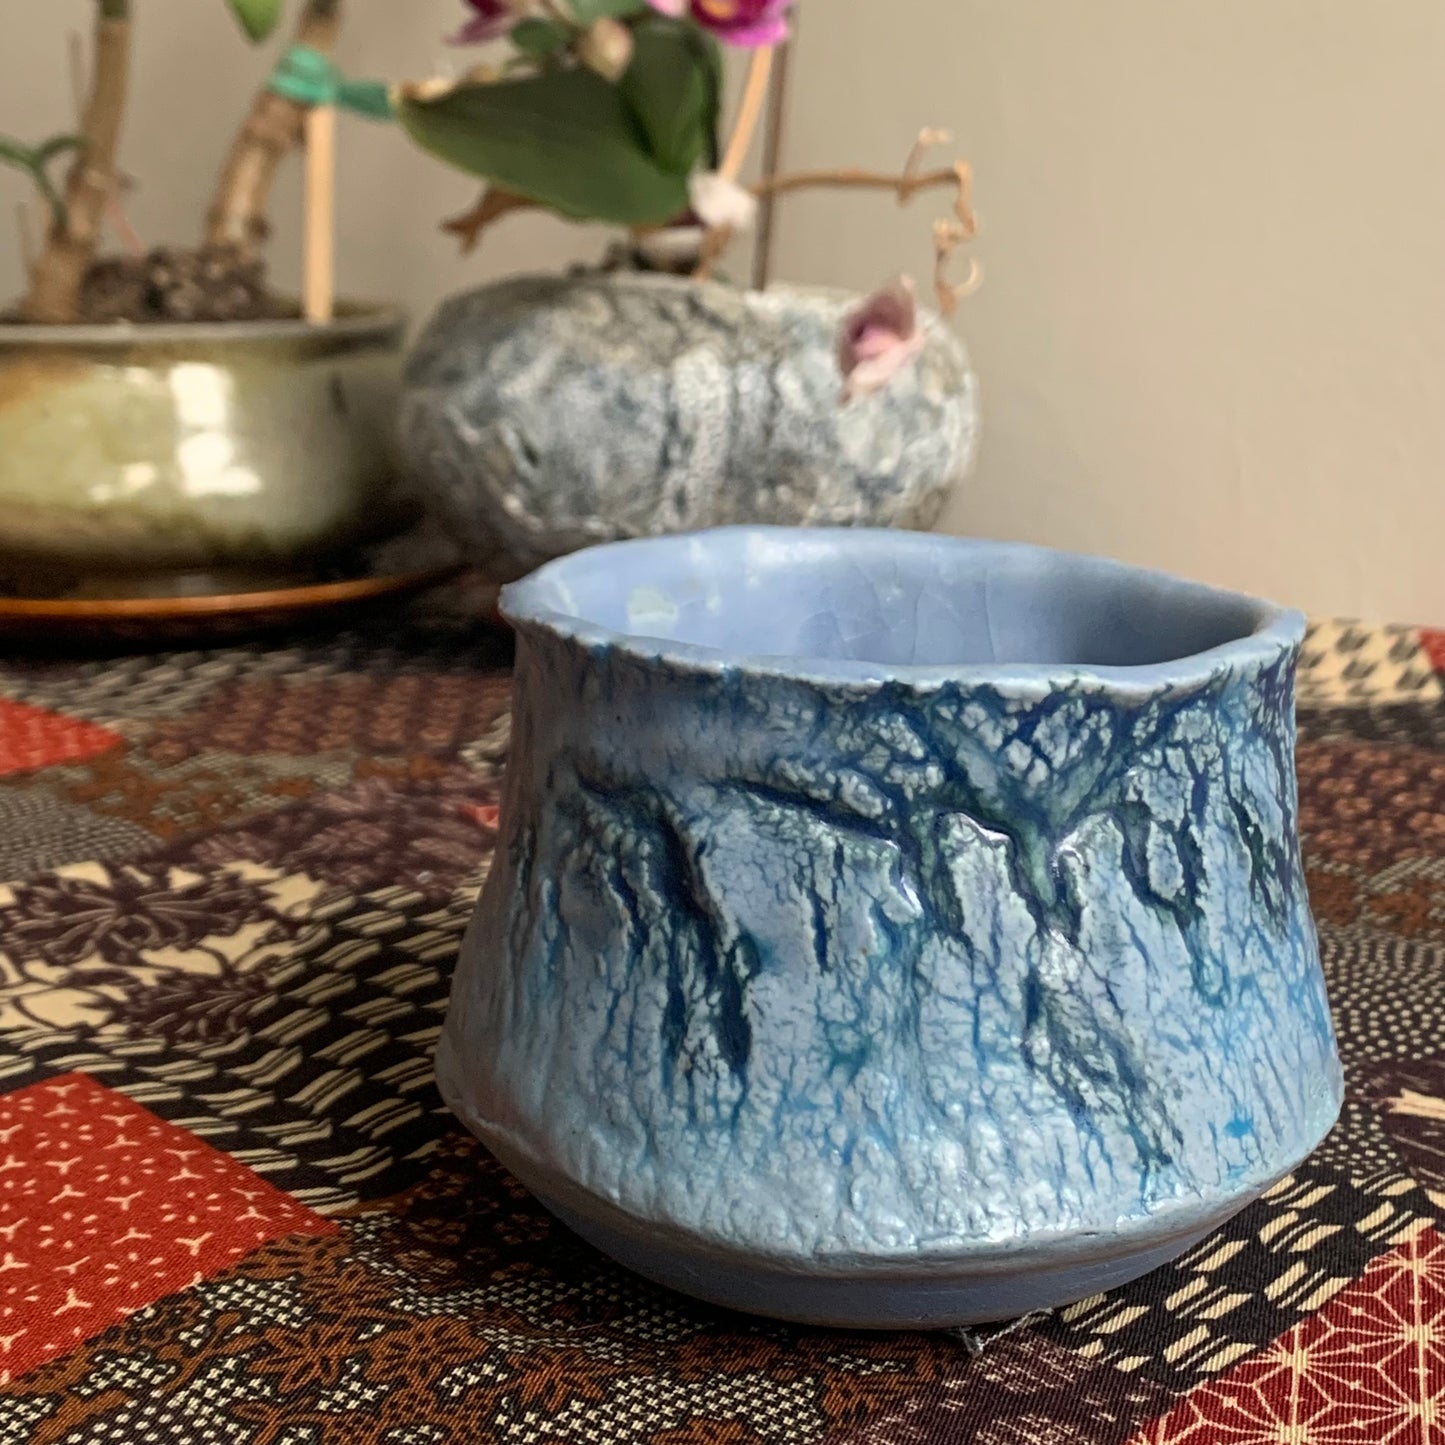 Blue Handbuilt Topographical Cup